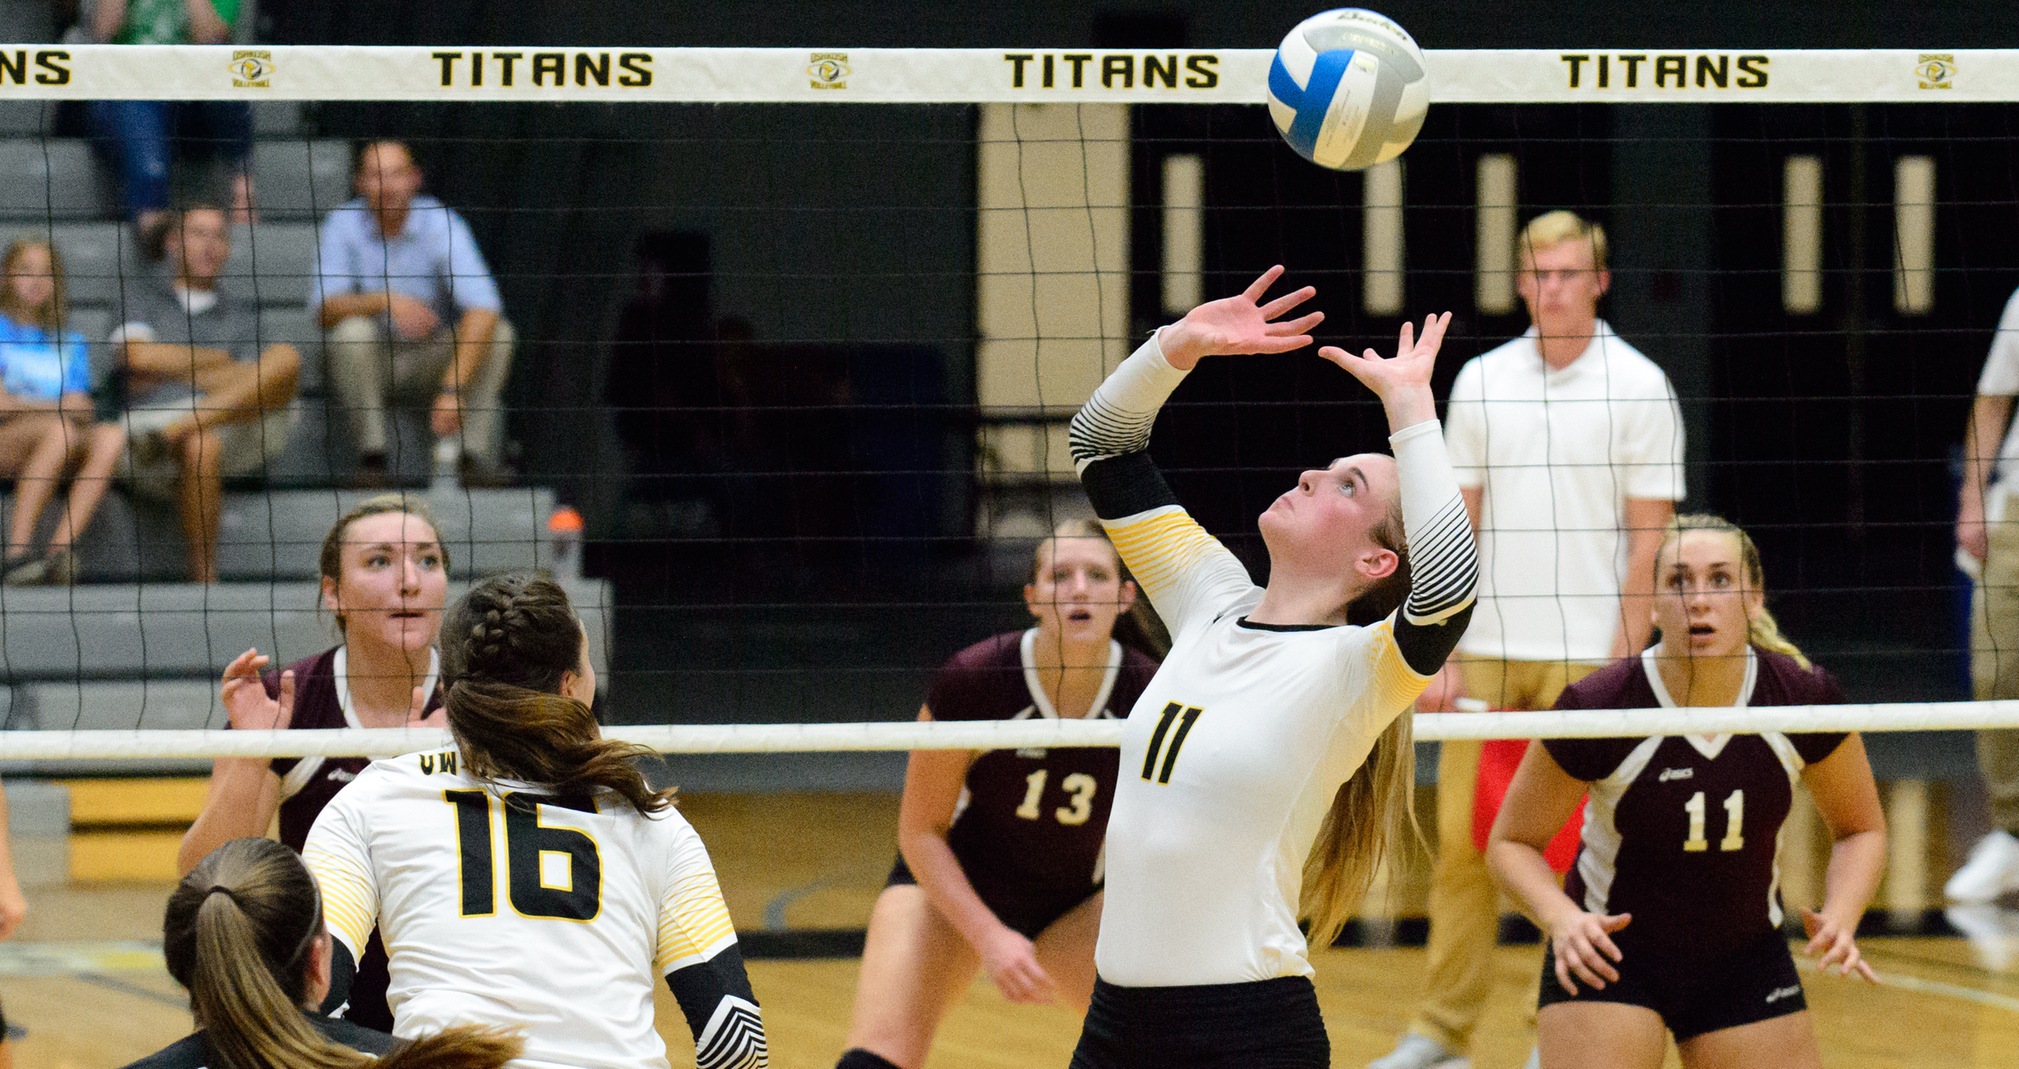 Samantha Jaeke had 24 assists and 10 digs against the Blugolds for her seventh double-double of the year.